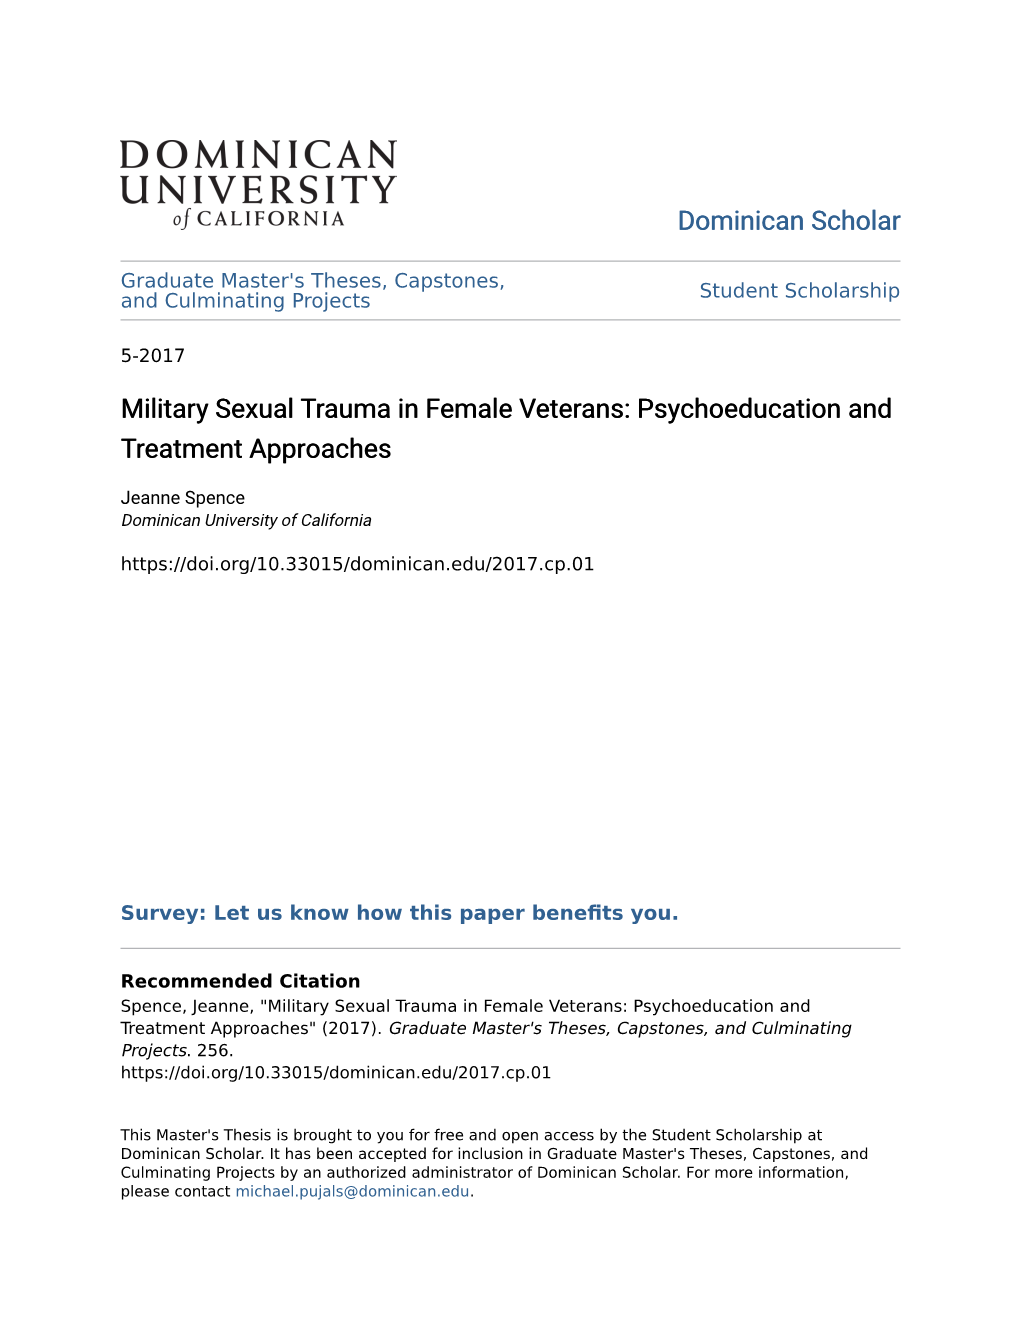 Military Sexual Trauma in Female Veterans: Psychoeducation and Treatment Approaches